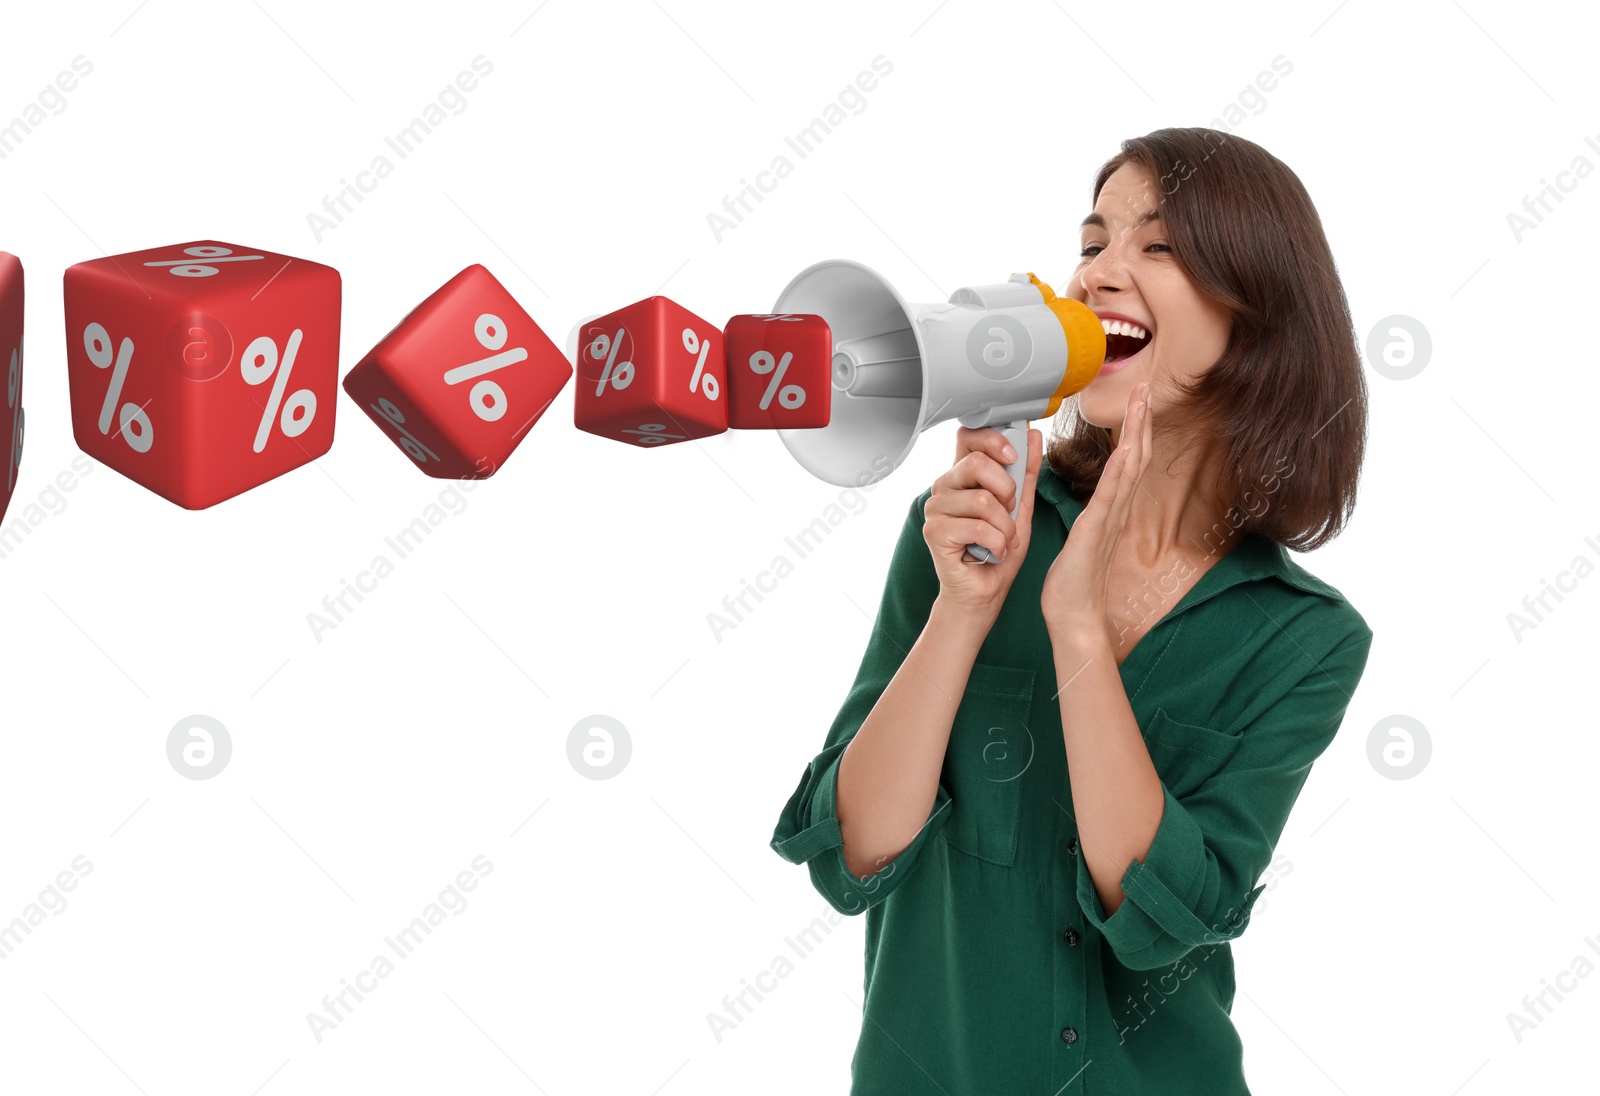 Image of Discount offer. Woman shouting into megaphone on white background. Cubes with percent signs coming out from device